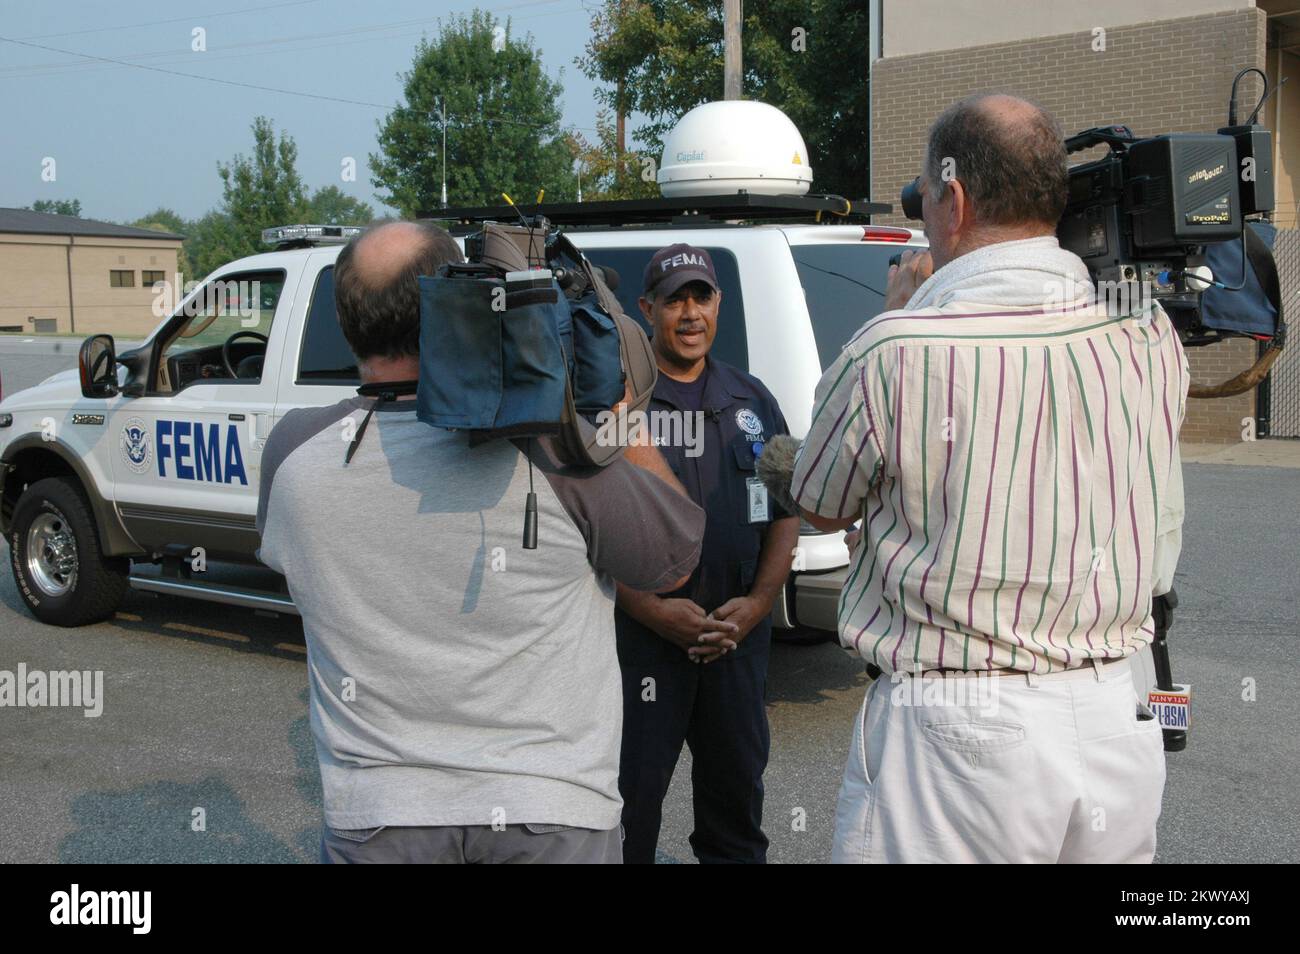 Marietta, GA, August 16, 2007   FEMA Federal Incident Response Support Team (FIRSTeam) leader Willie Womack speaks with the media before departing for Puerto Rico in anticipation of Hurricane Dean. The FIRST Team leads FEMA's initial response to disasters. Mark Wolfe/FEMA.. Photographs Relating to Disasters and Emergency Management Programs, Activities, and Officials Stock Photo